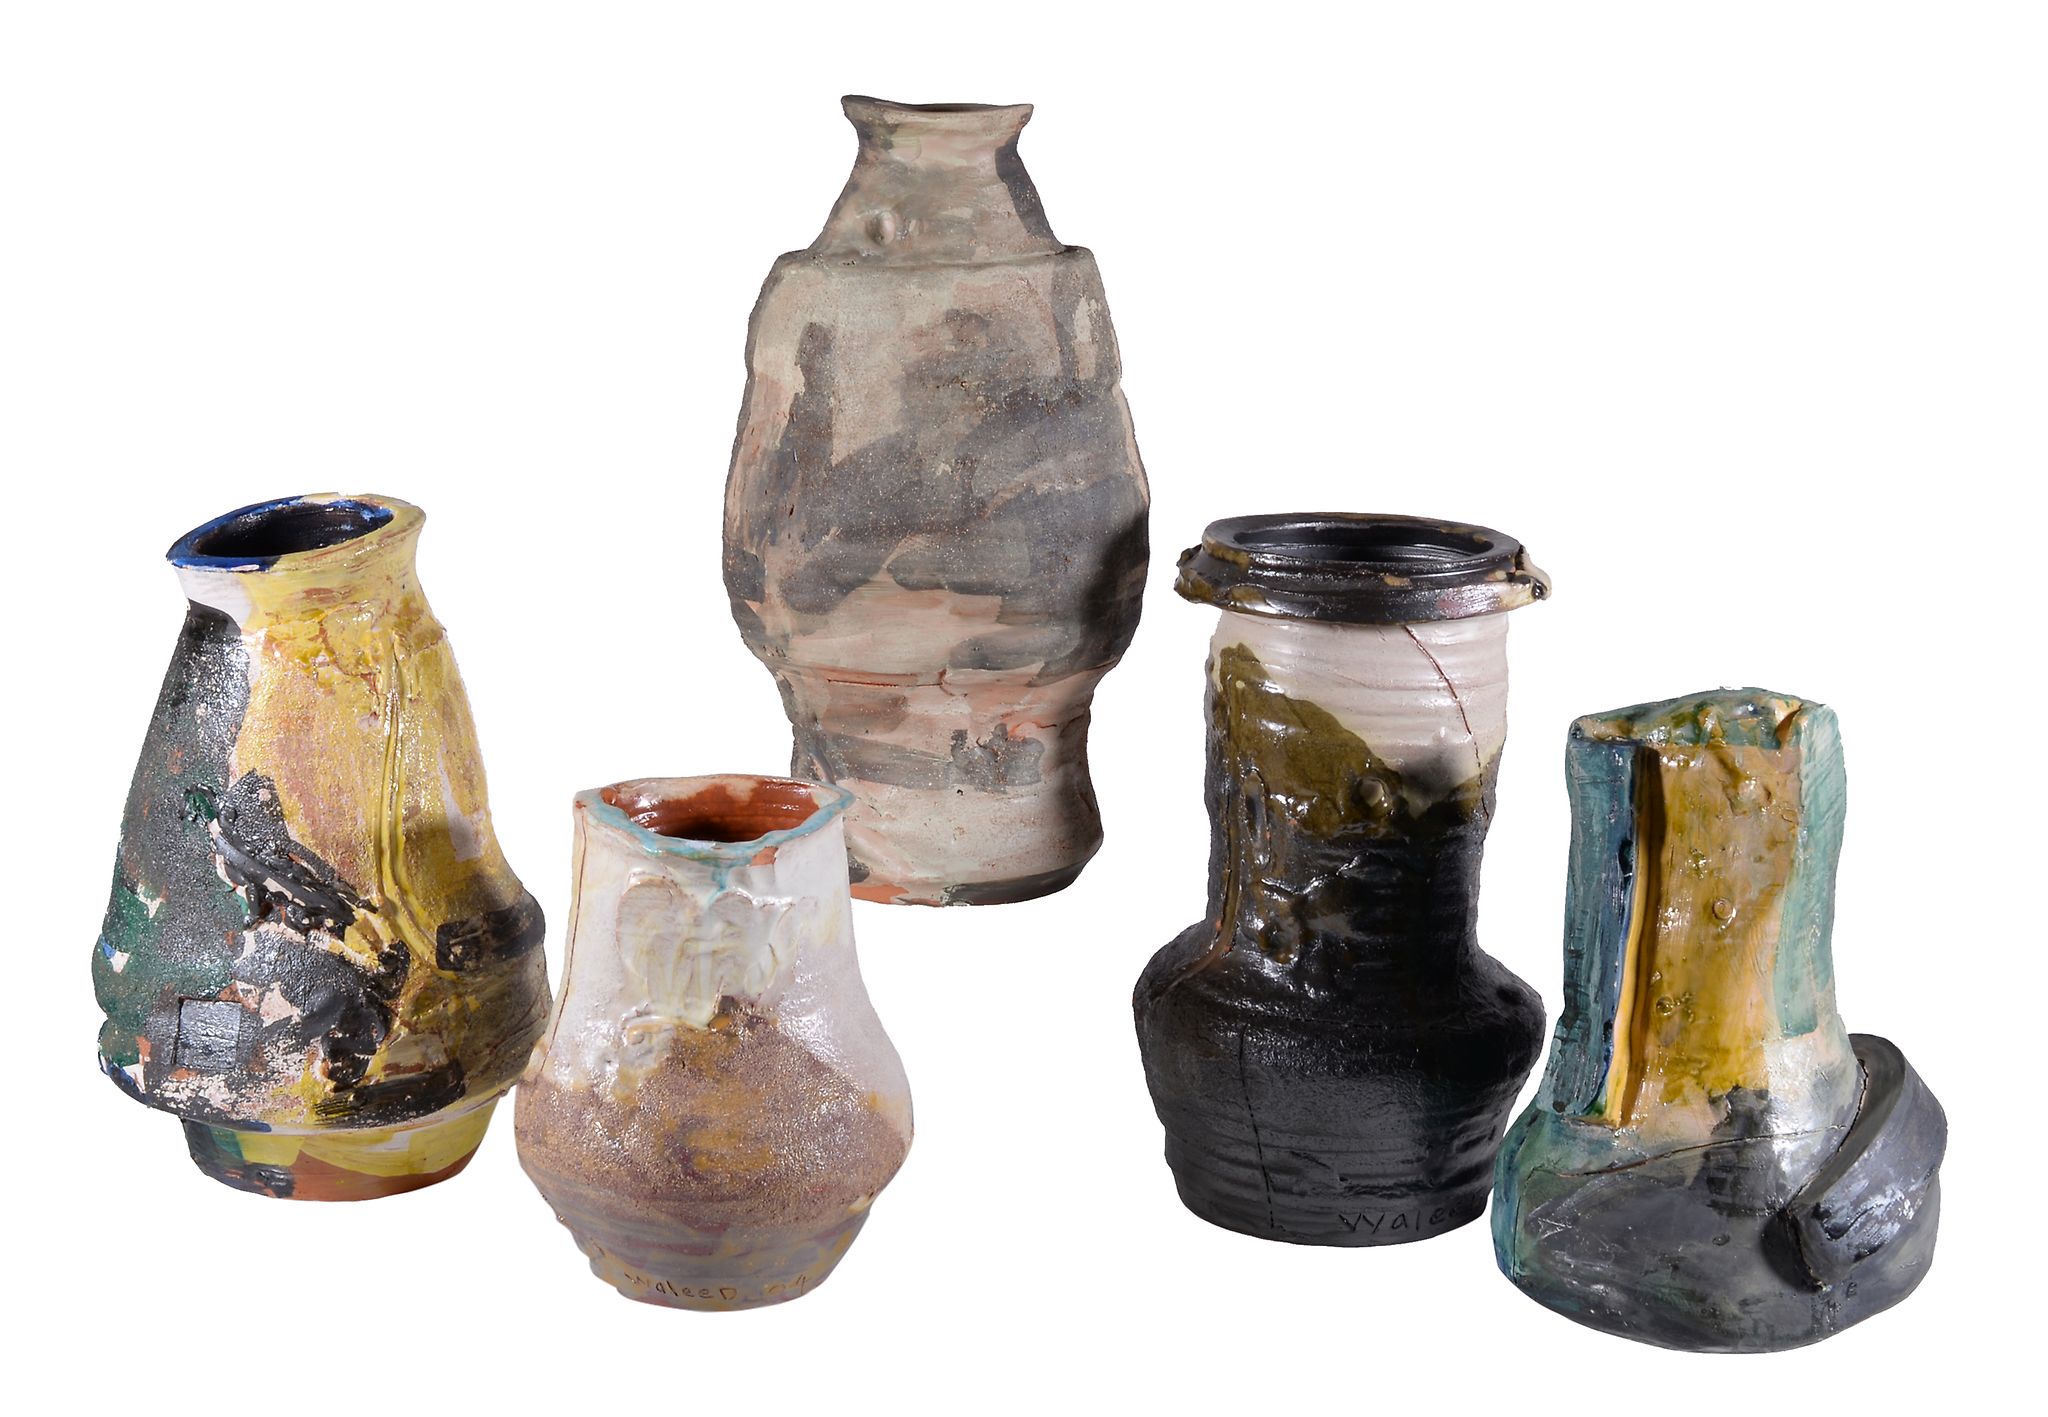 Waleed R. Qaisi (Iraqi, b. 1963), a sculpture and four earthenware vases, glazed in various